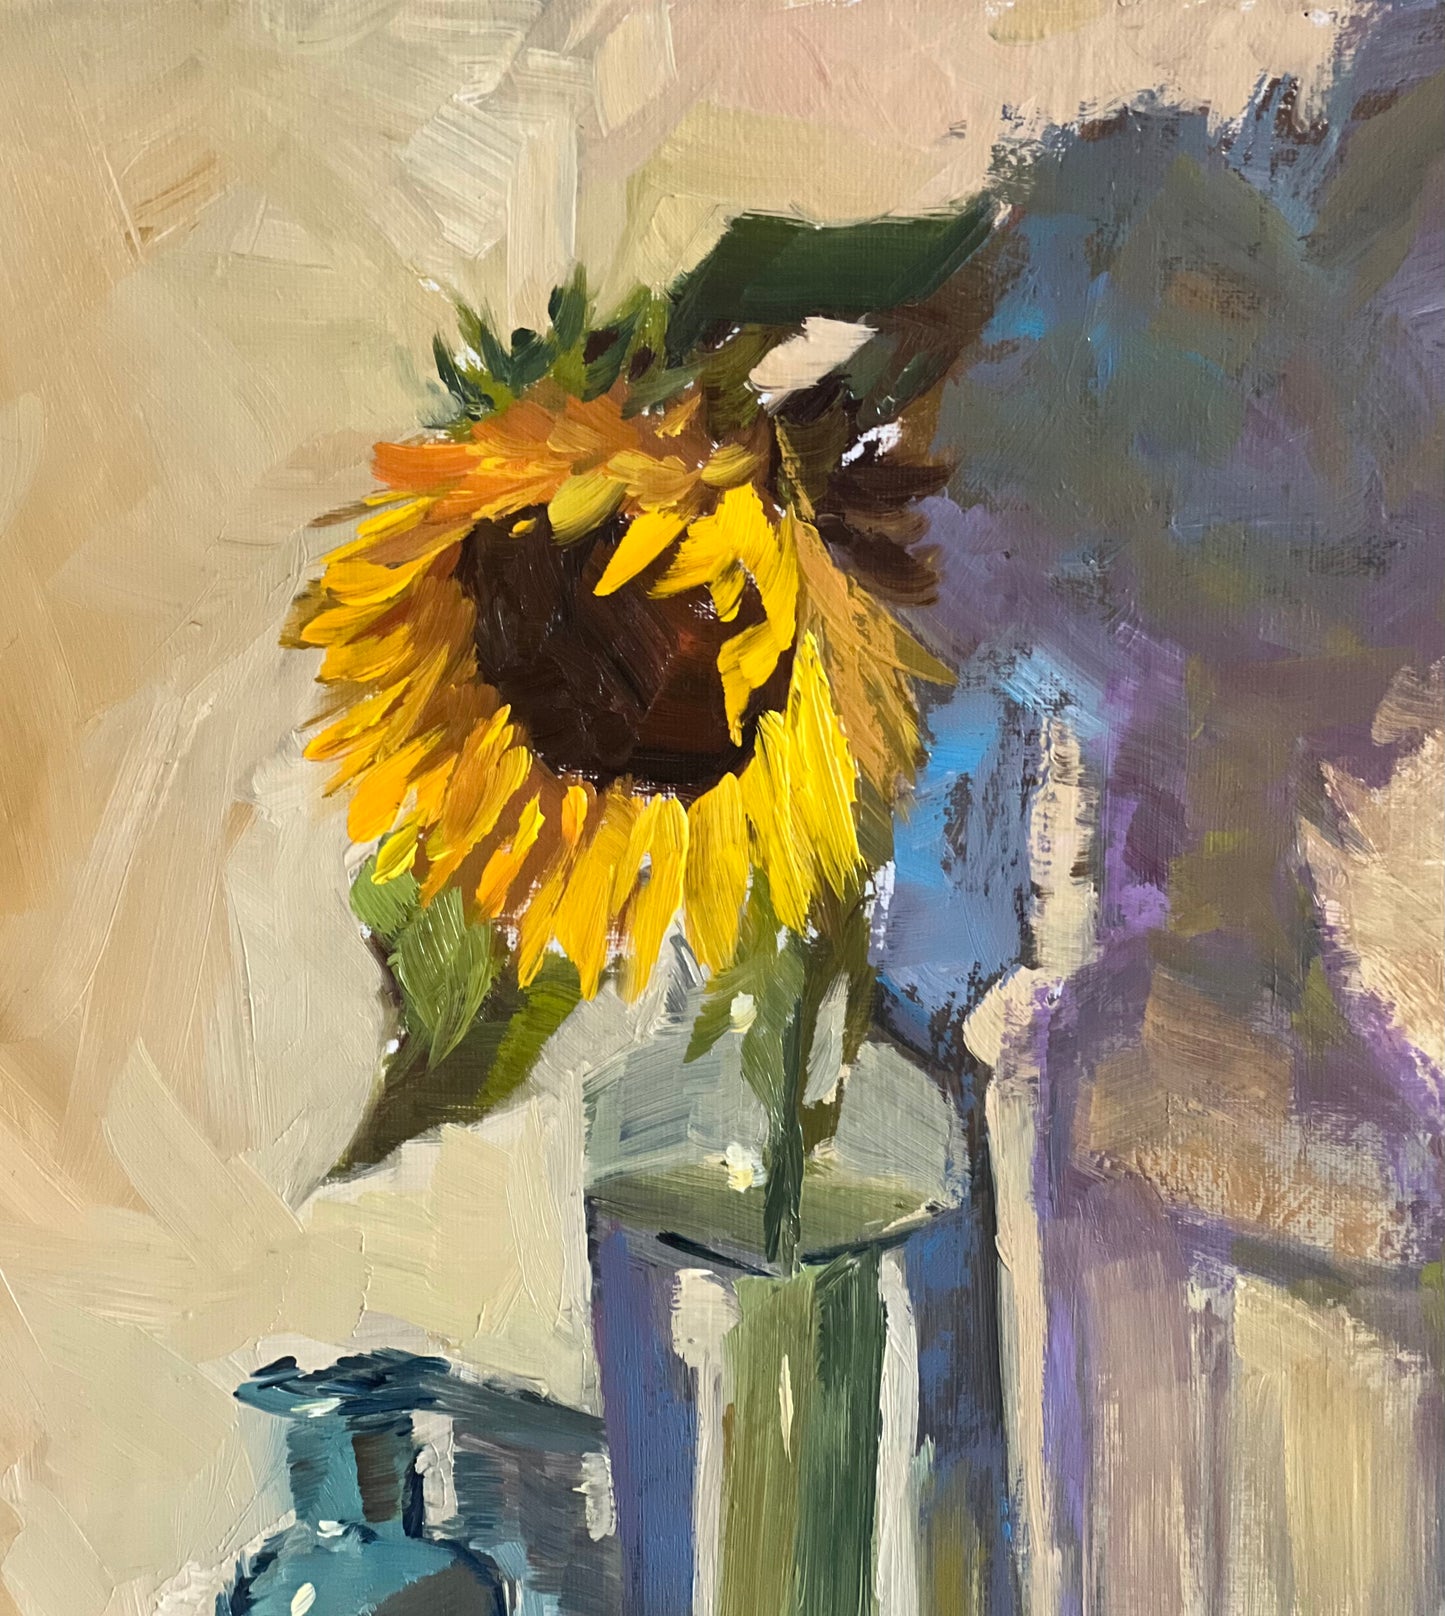 Sunflower Series 6 - Original Stilllife Painting, 8 by 12 inches